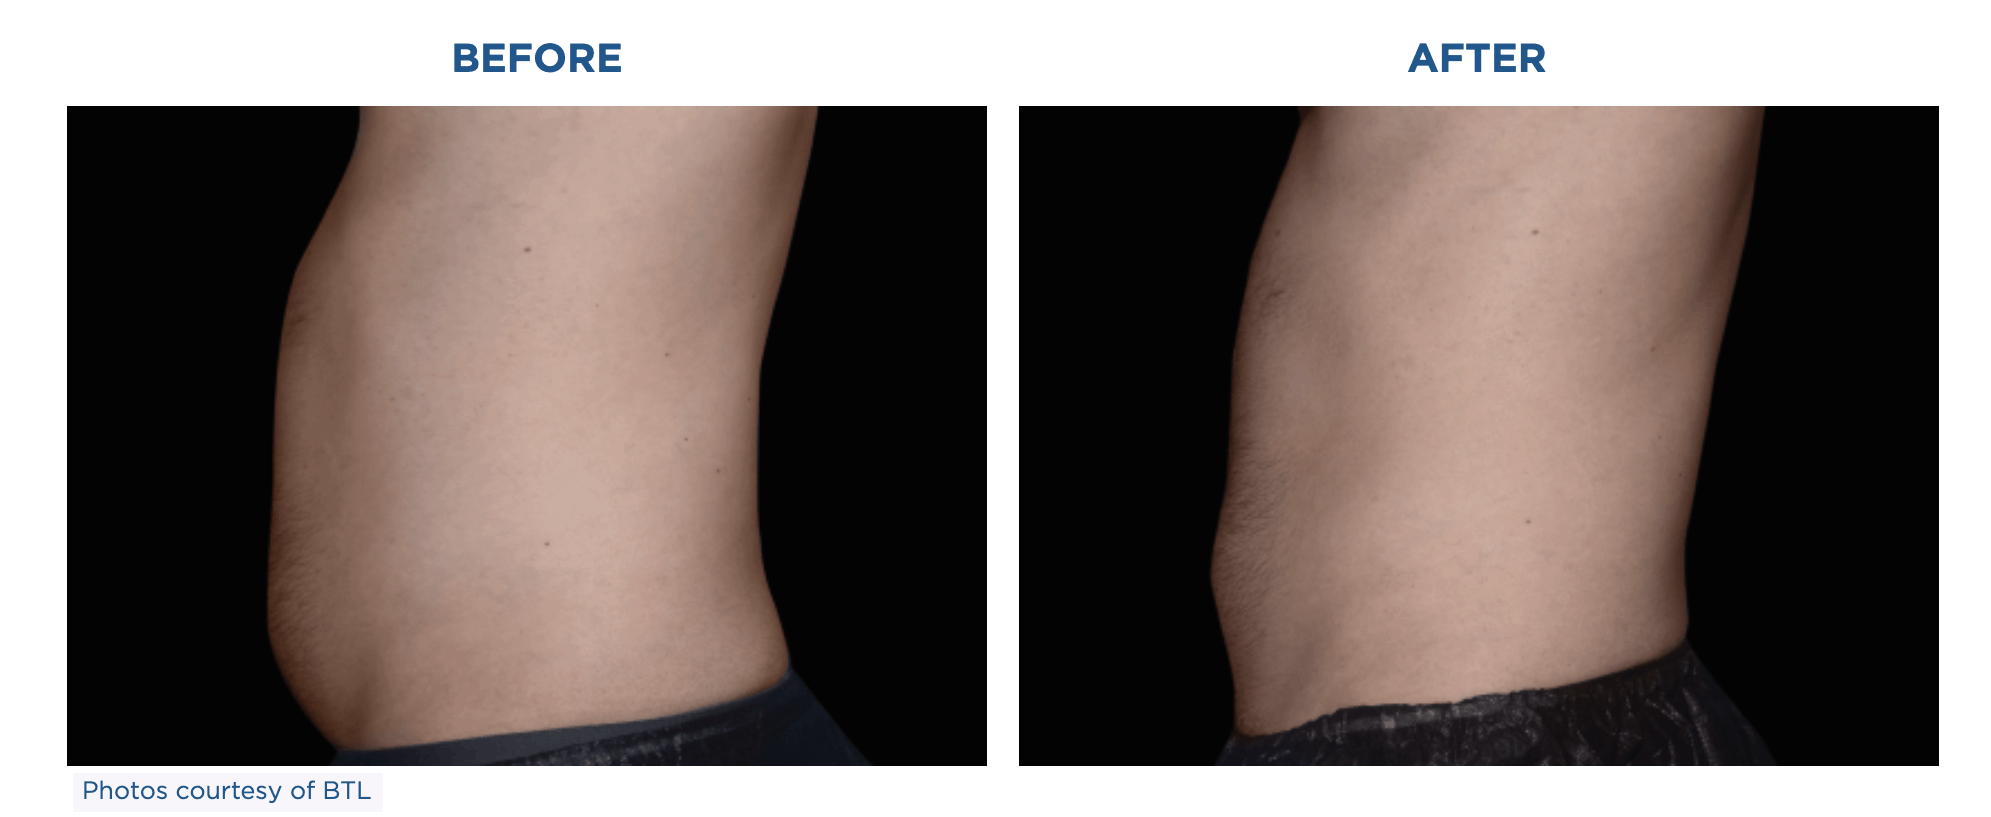 Before and after images showcasing the transformative results of Emsculpt Neo on a woman's thigh.